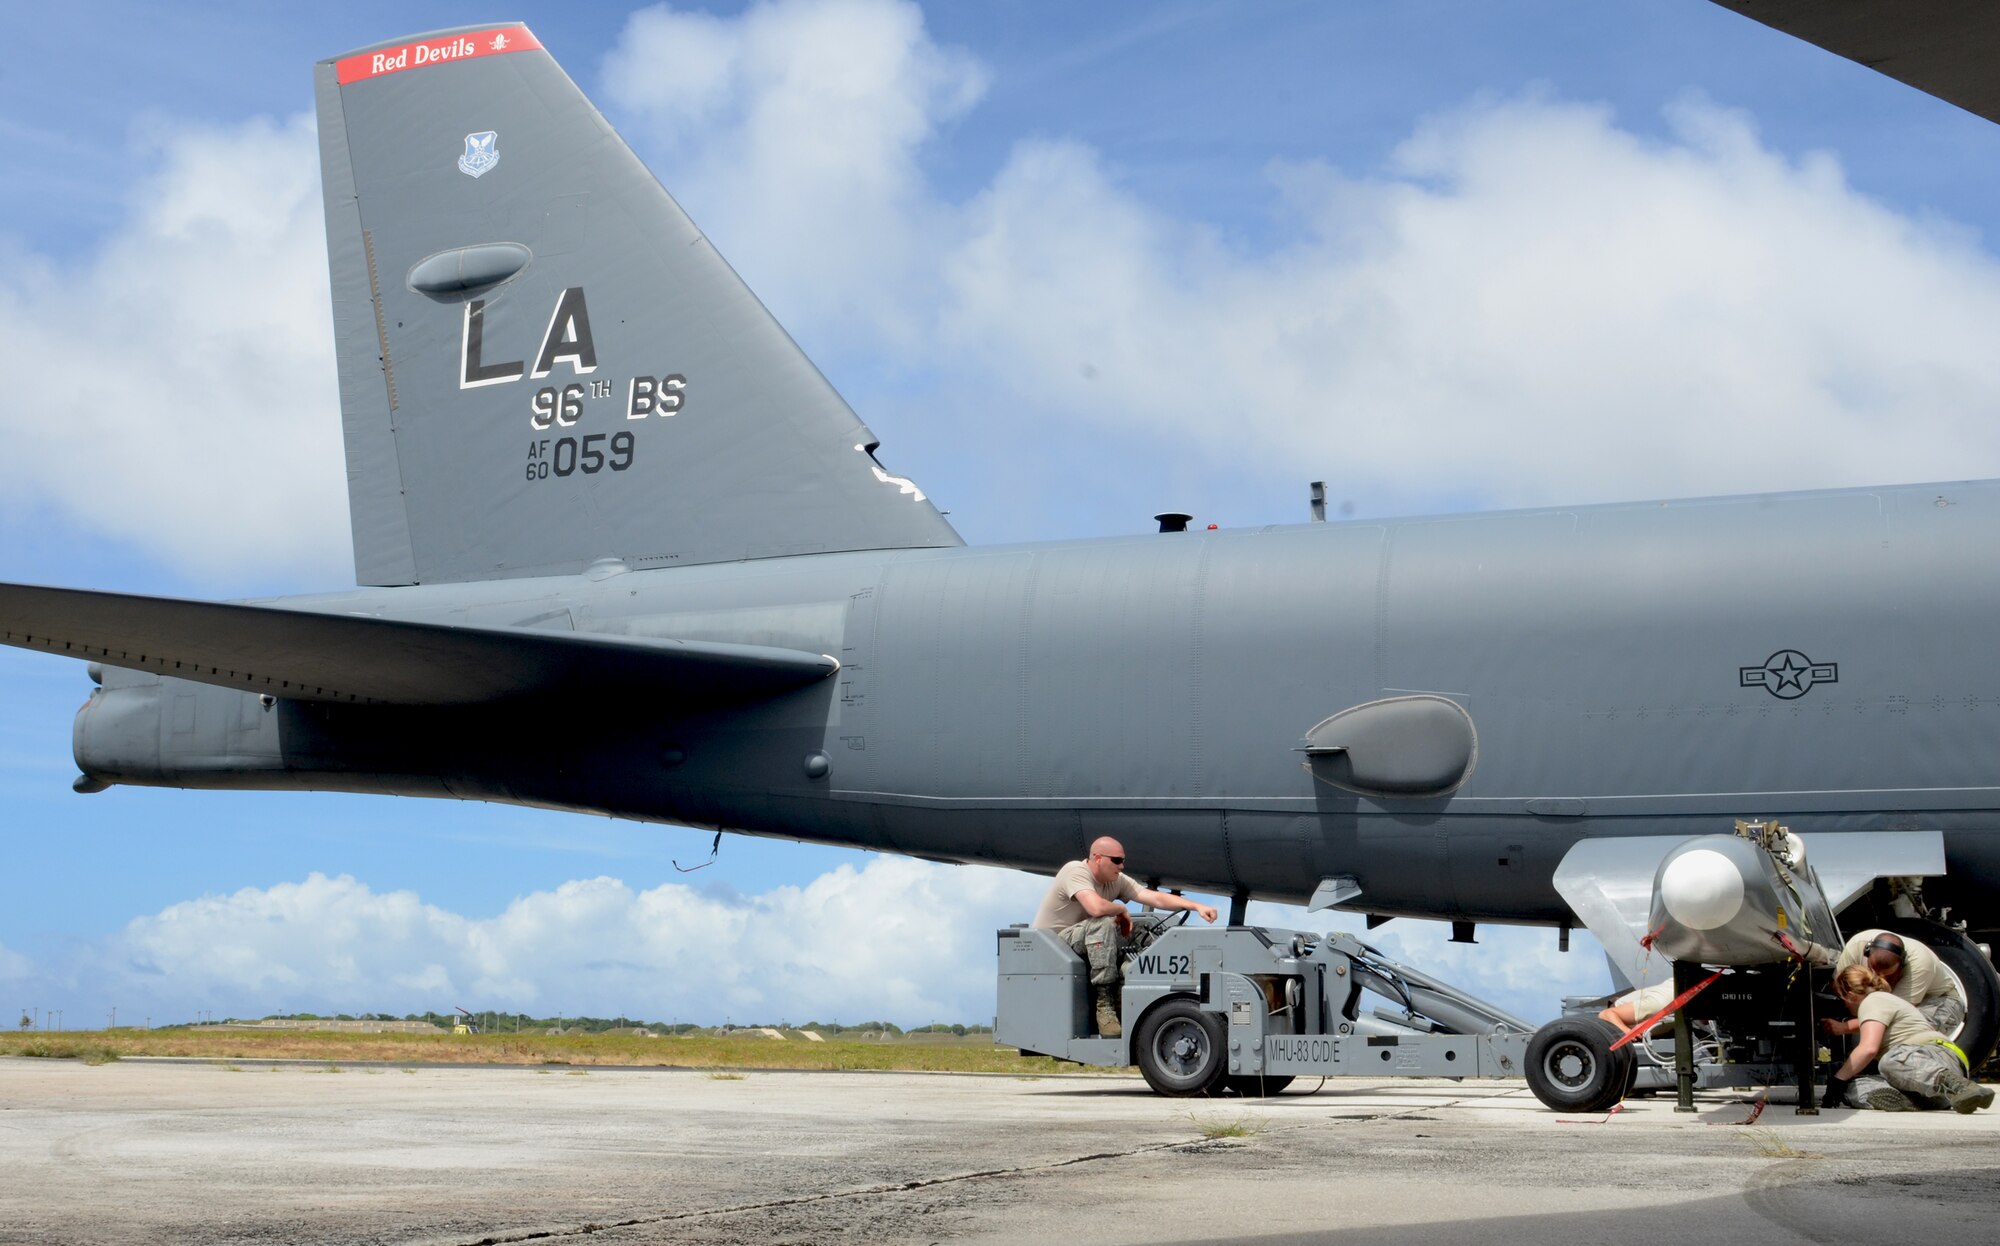 Airmen from the 36th Expeditionary Aircraft Maintenance Squadron, deployed from the 23rd Expeditionary Aircraft Maintenance Unit, Minot Air Force Base, N.D., prepare a training AGM-86C Conventional Air-Launched Cruise Missile for loading on to a B-52 Stratofortress during a load demonstration at Andersen Air Force Base, Guam, April 16, 2013. All EAMUs deployed to Andersen have to pass a load inspection within 10 days of arrival as part of a U.S. Pacific Command requirement to ensure all tools and equipment are mission ready. It is an opportunity for maintainers to obtain munitions-loading experience in both a training and tropical environment. (U.S. Air Force photo by Senior Airman Benjamin Wiseman/Released)